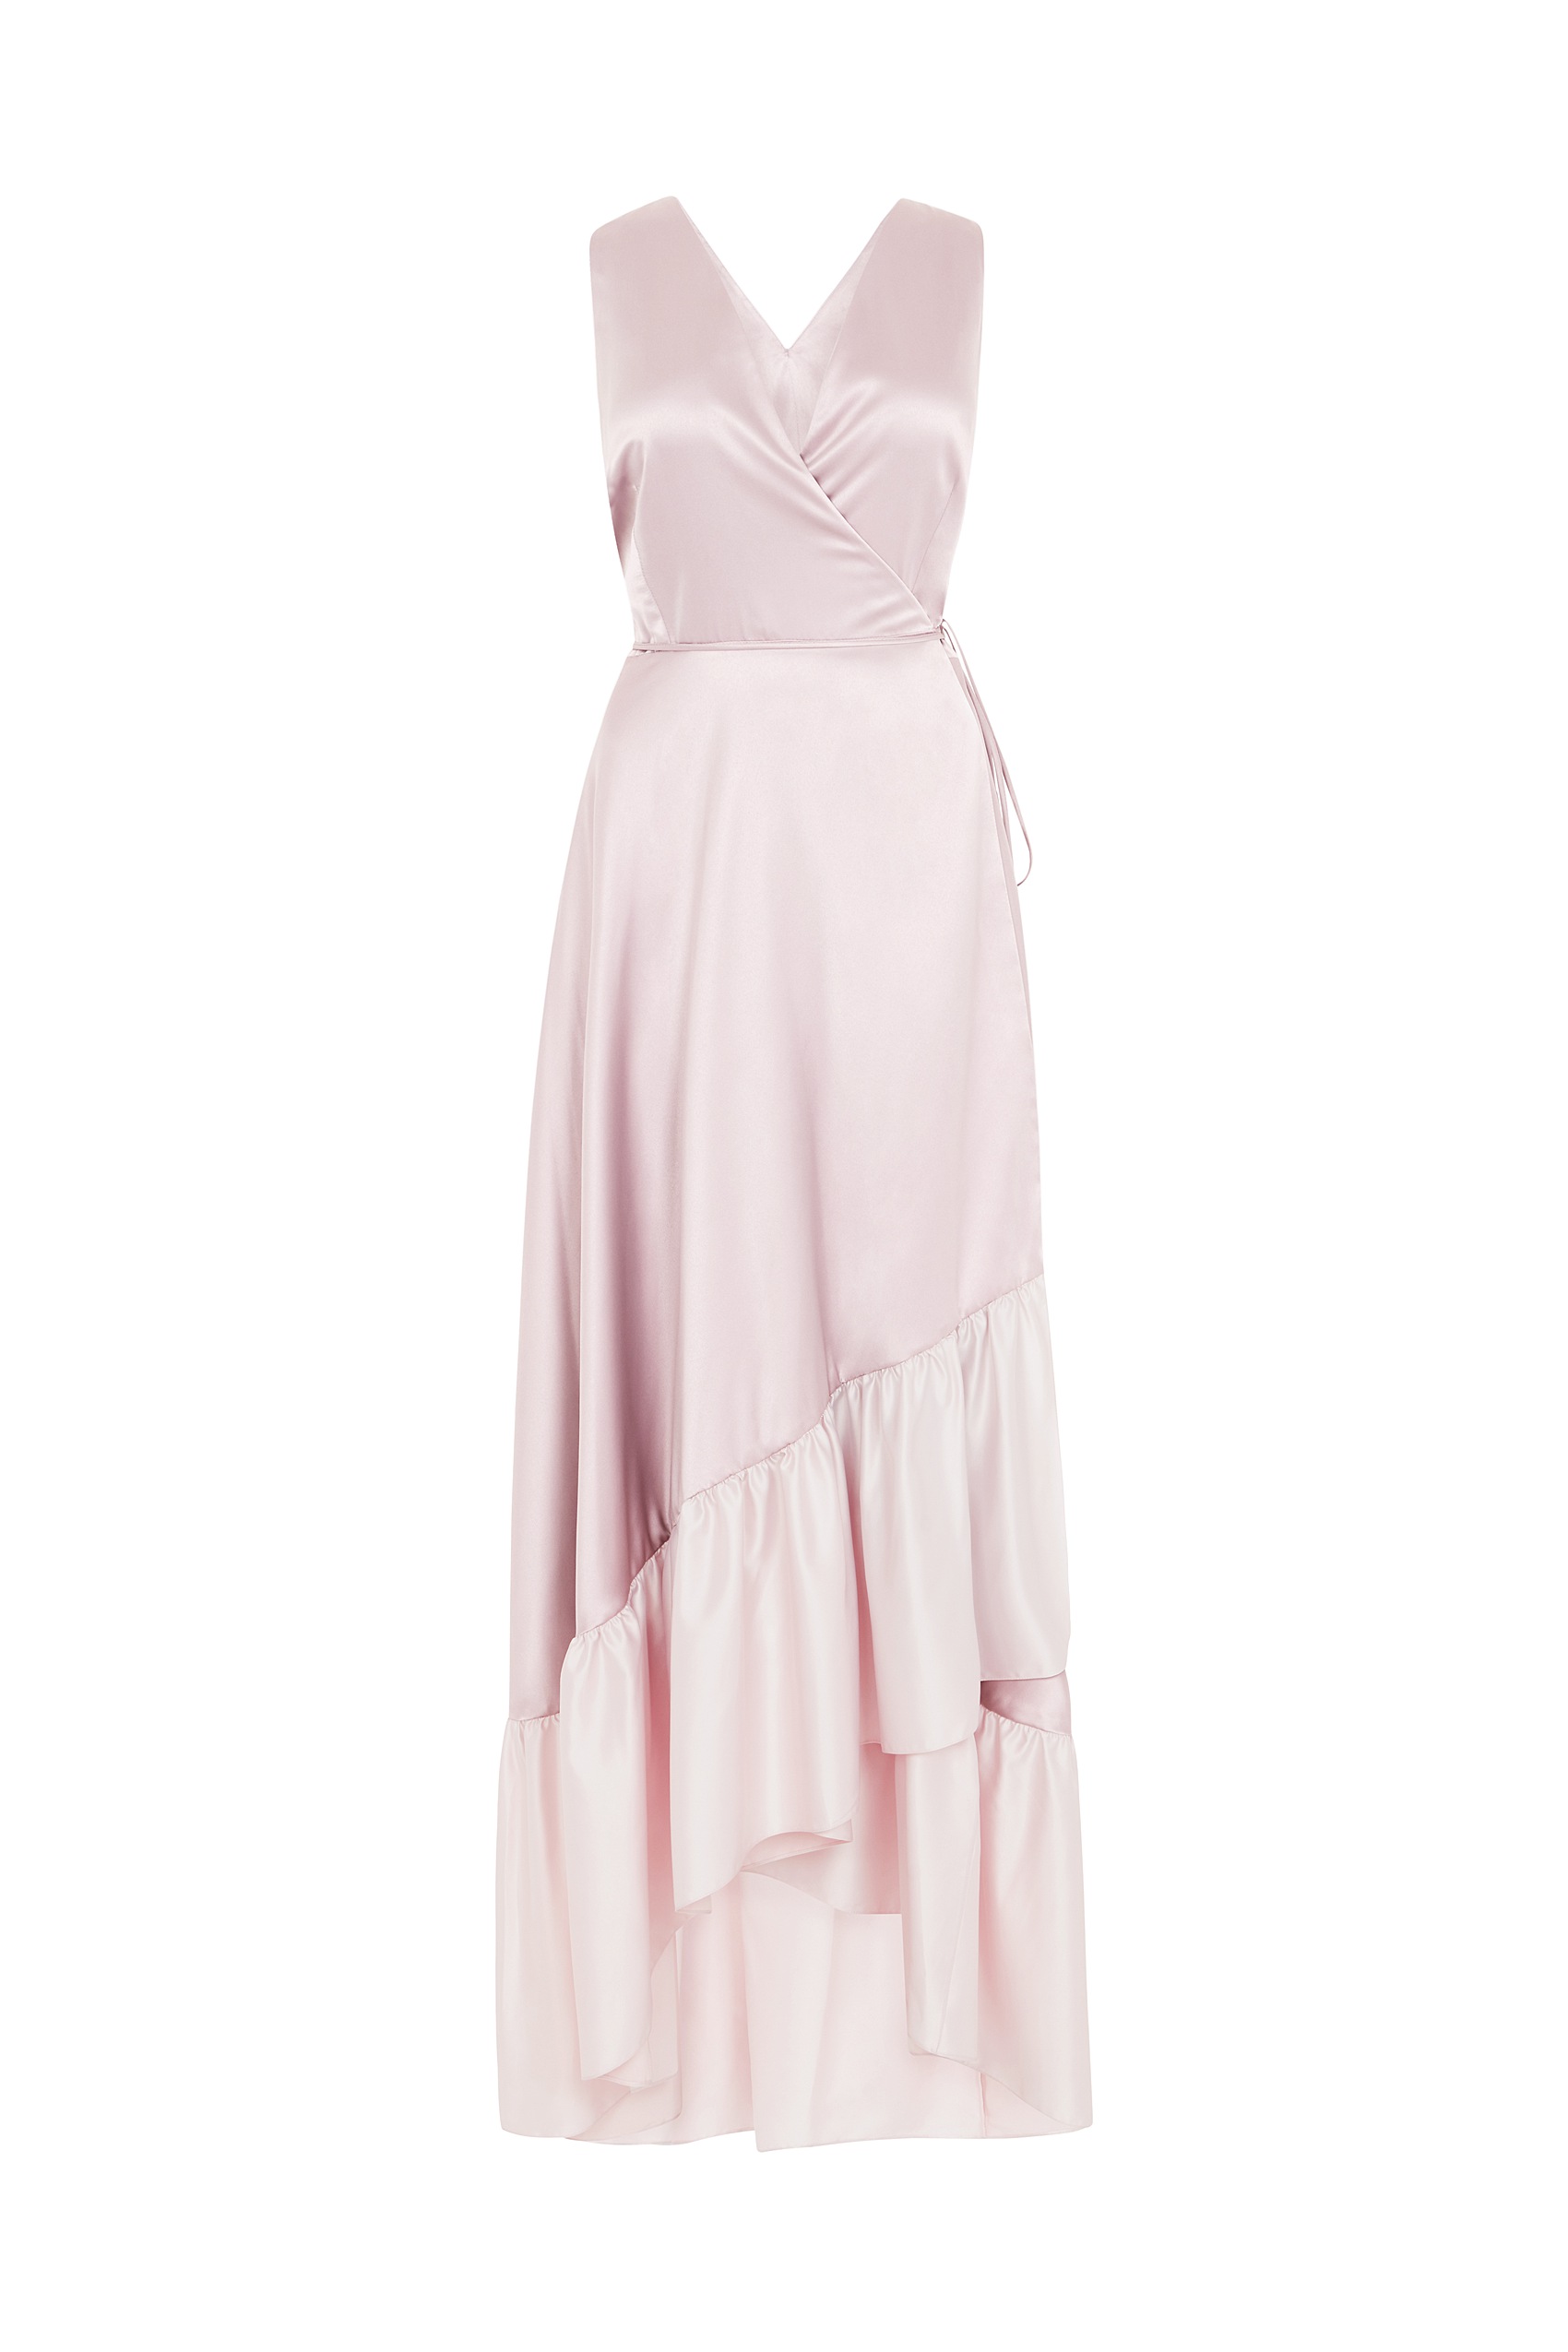 Fox dress in two-tone pink